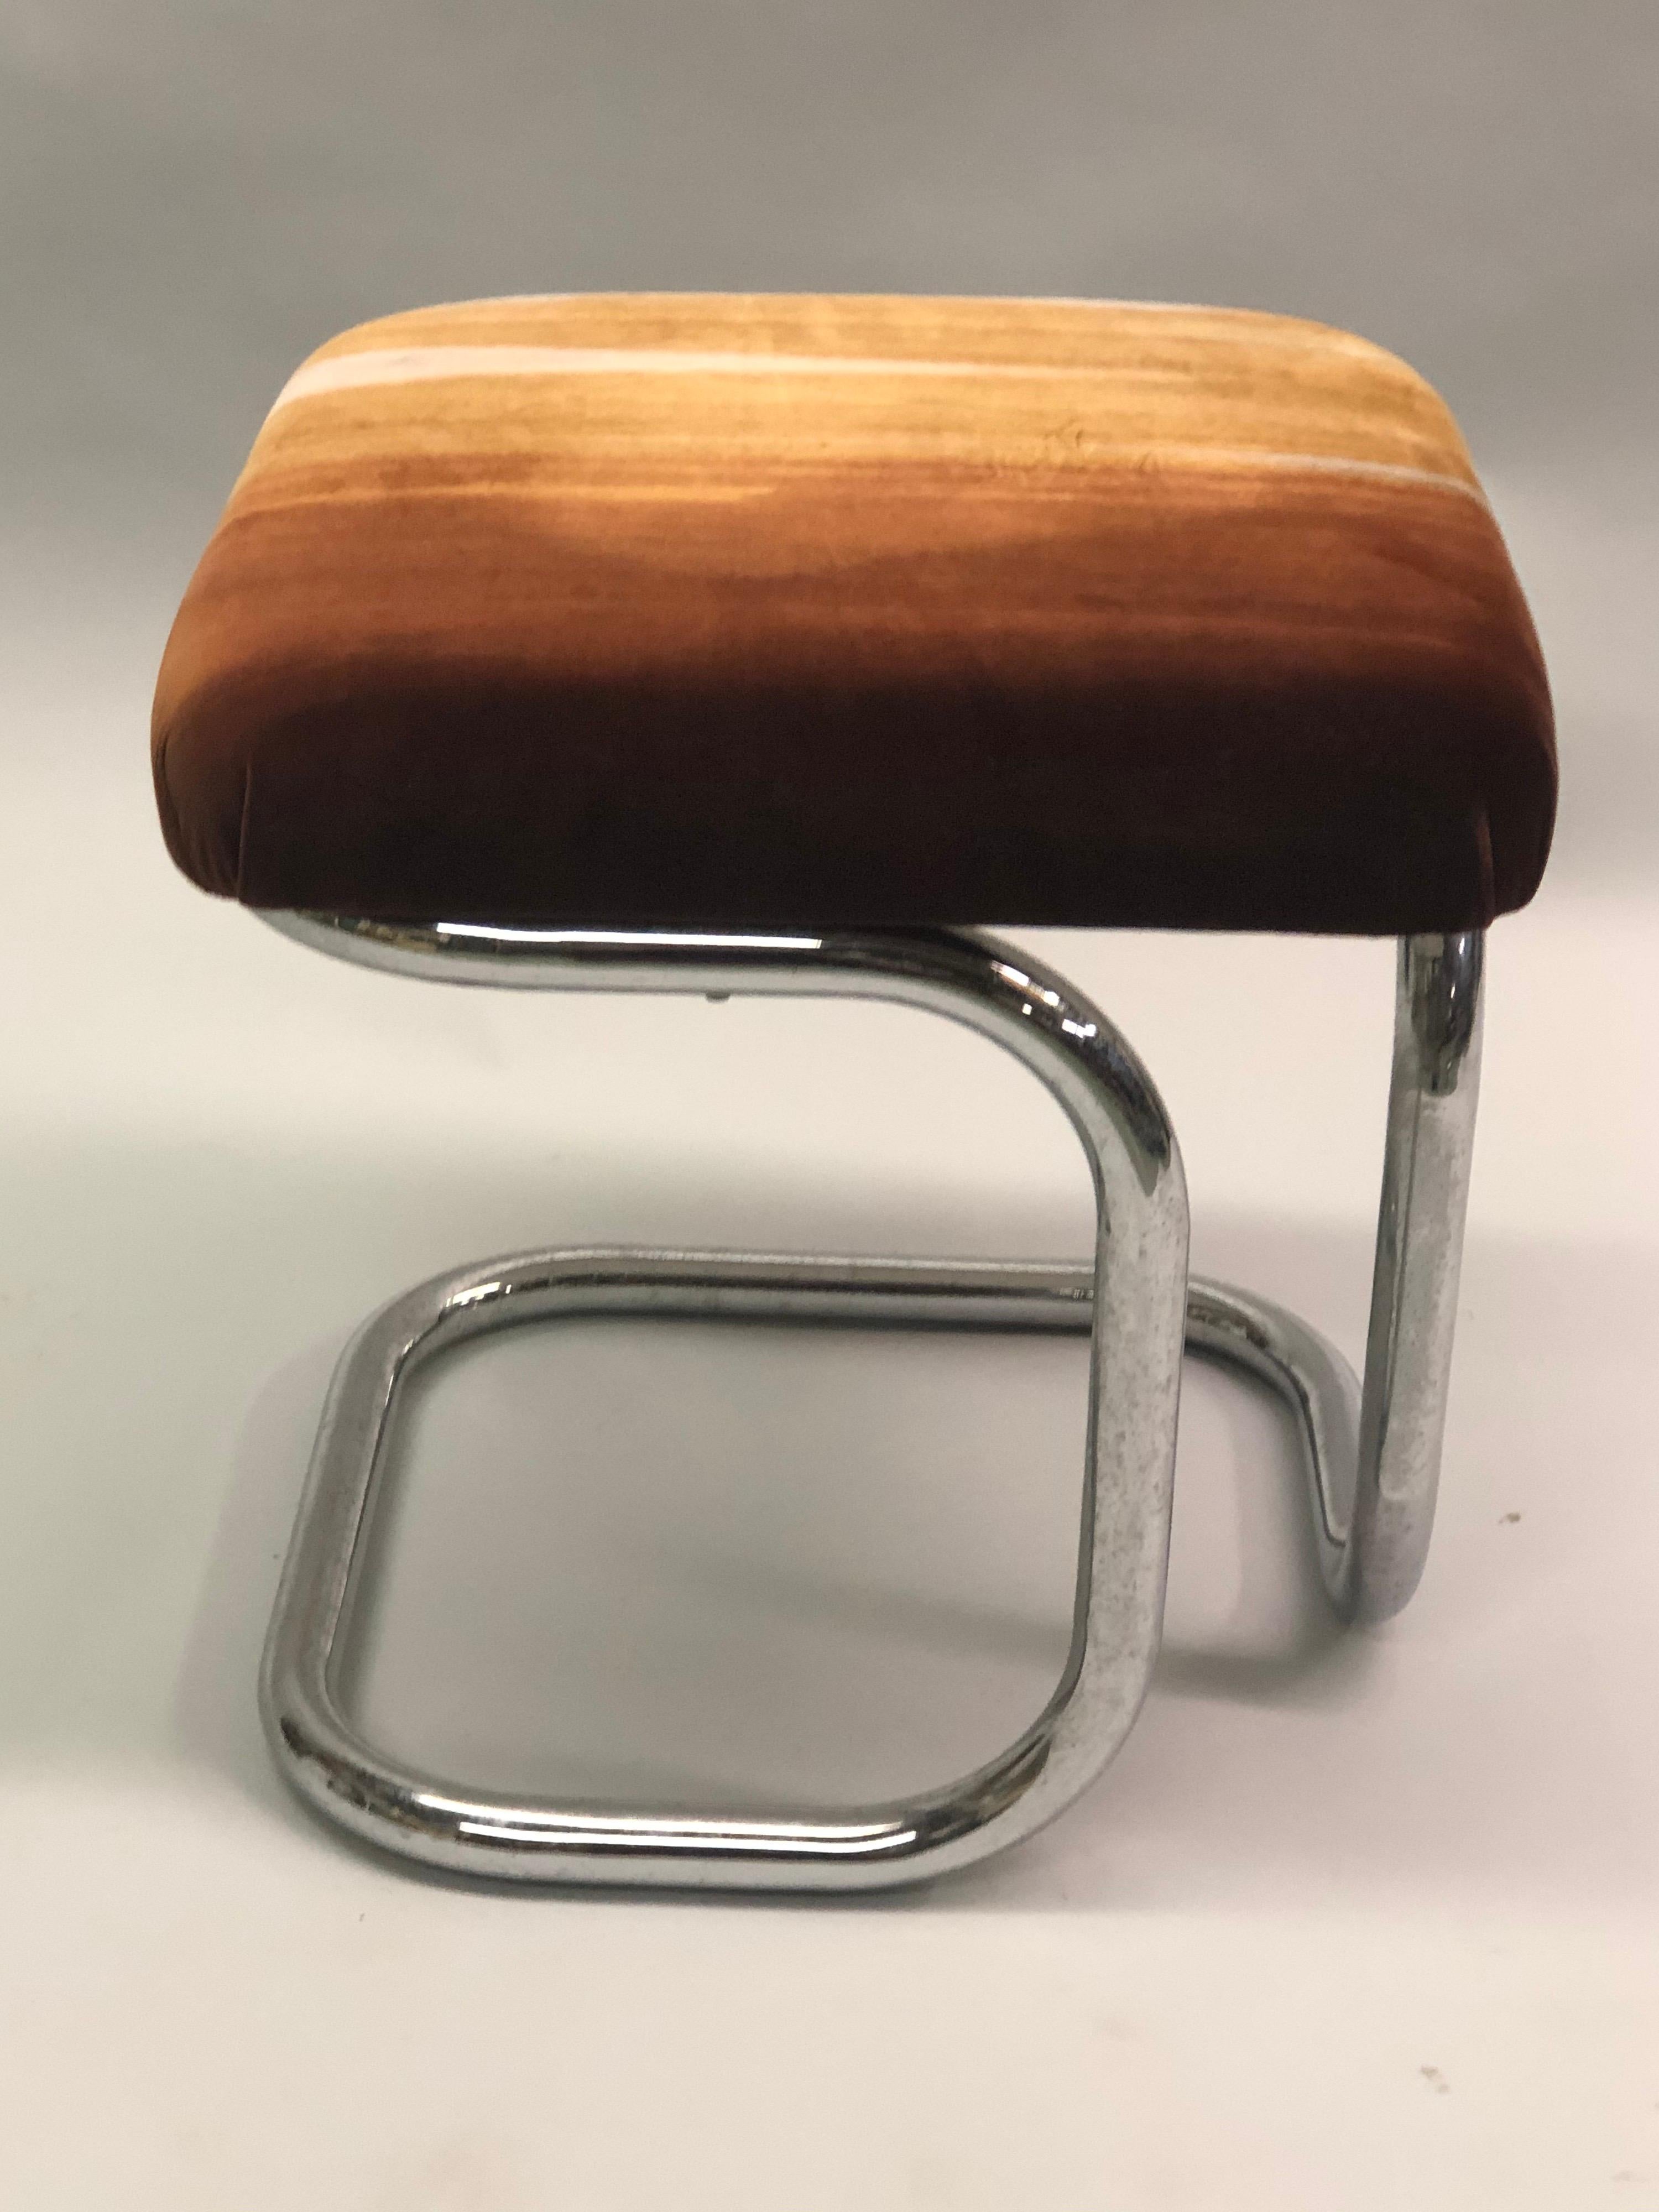 Pair of French Modernist ‘Bauhaus’ Stools with Upholstered Seats by Hermès For Sale 3